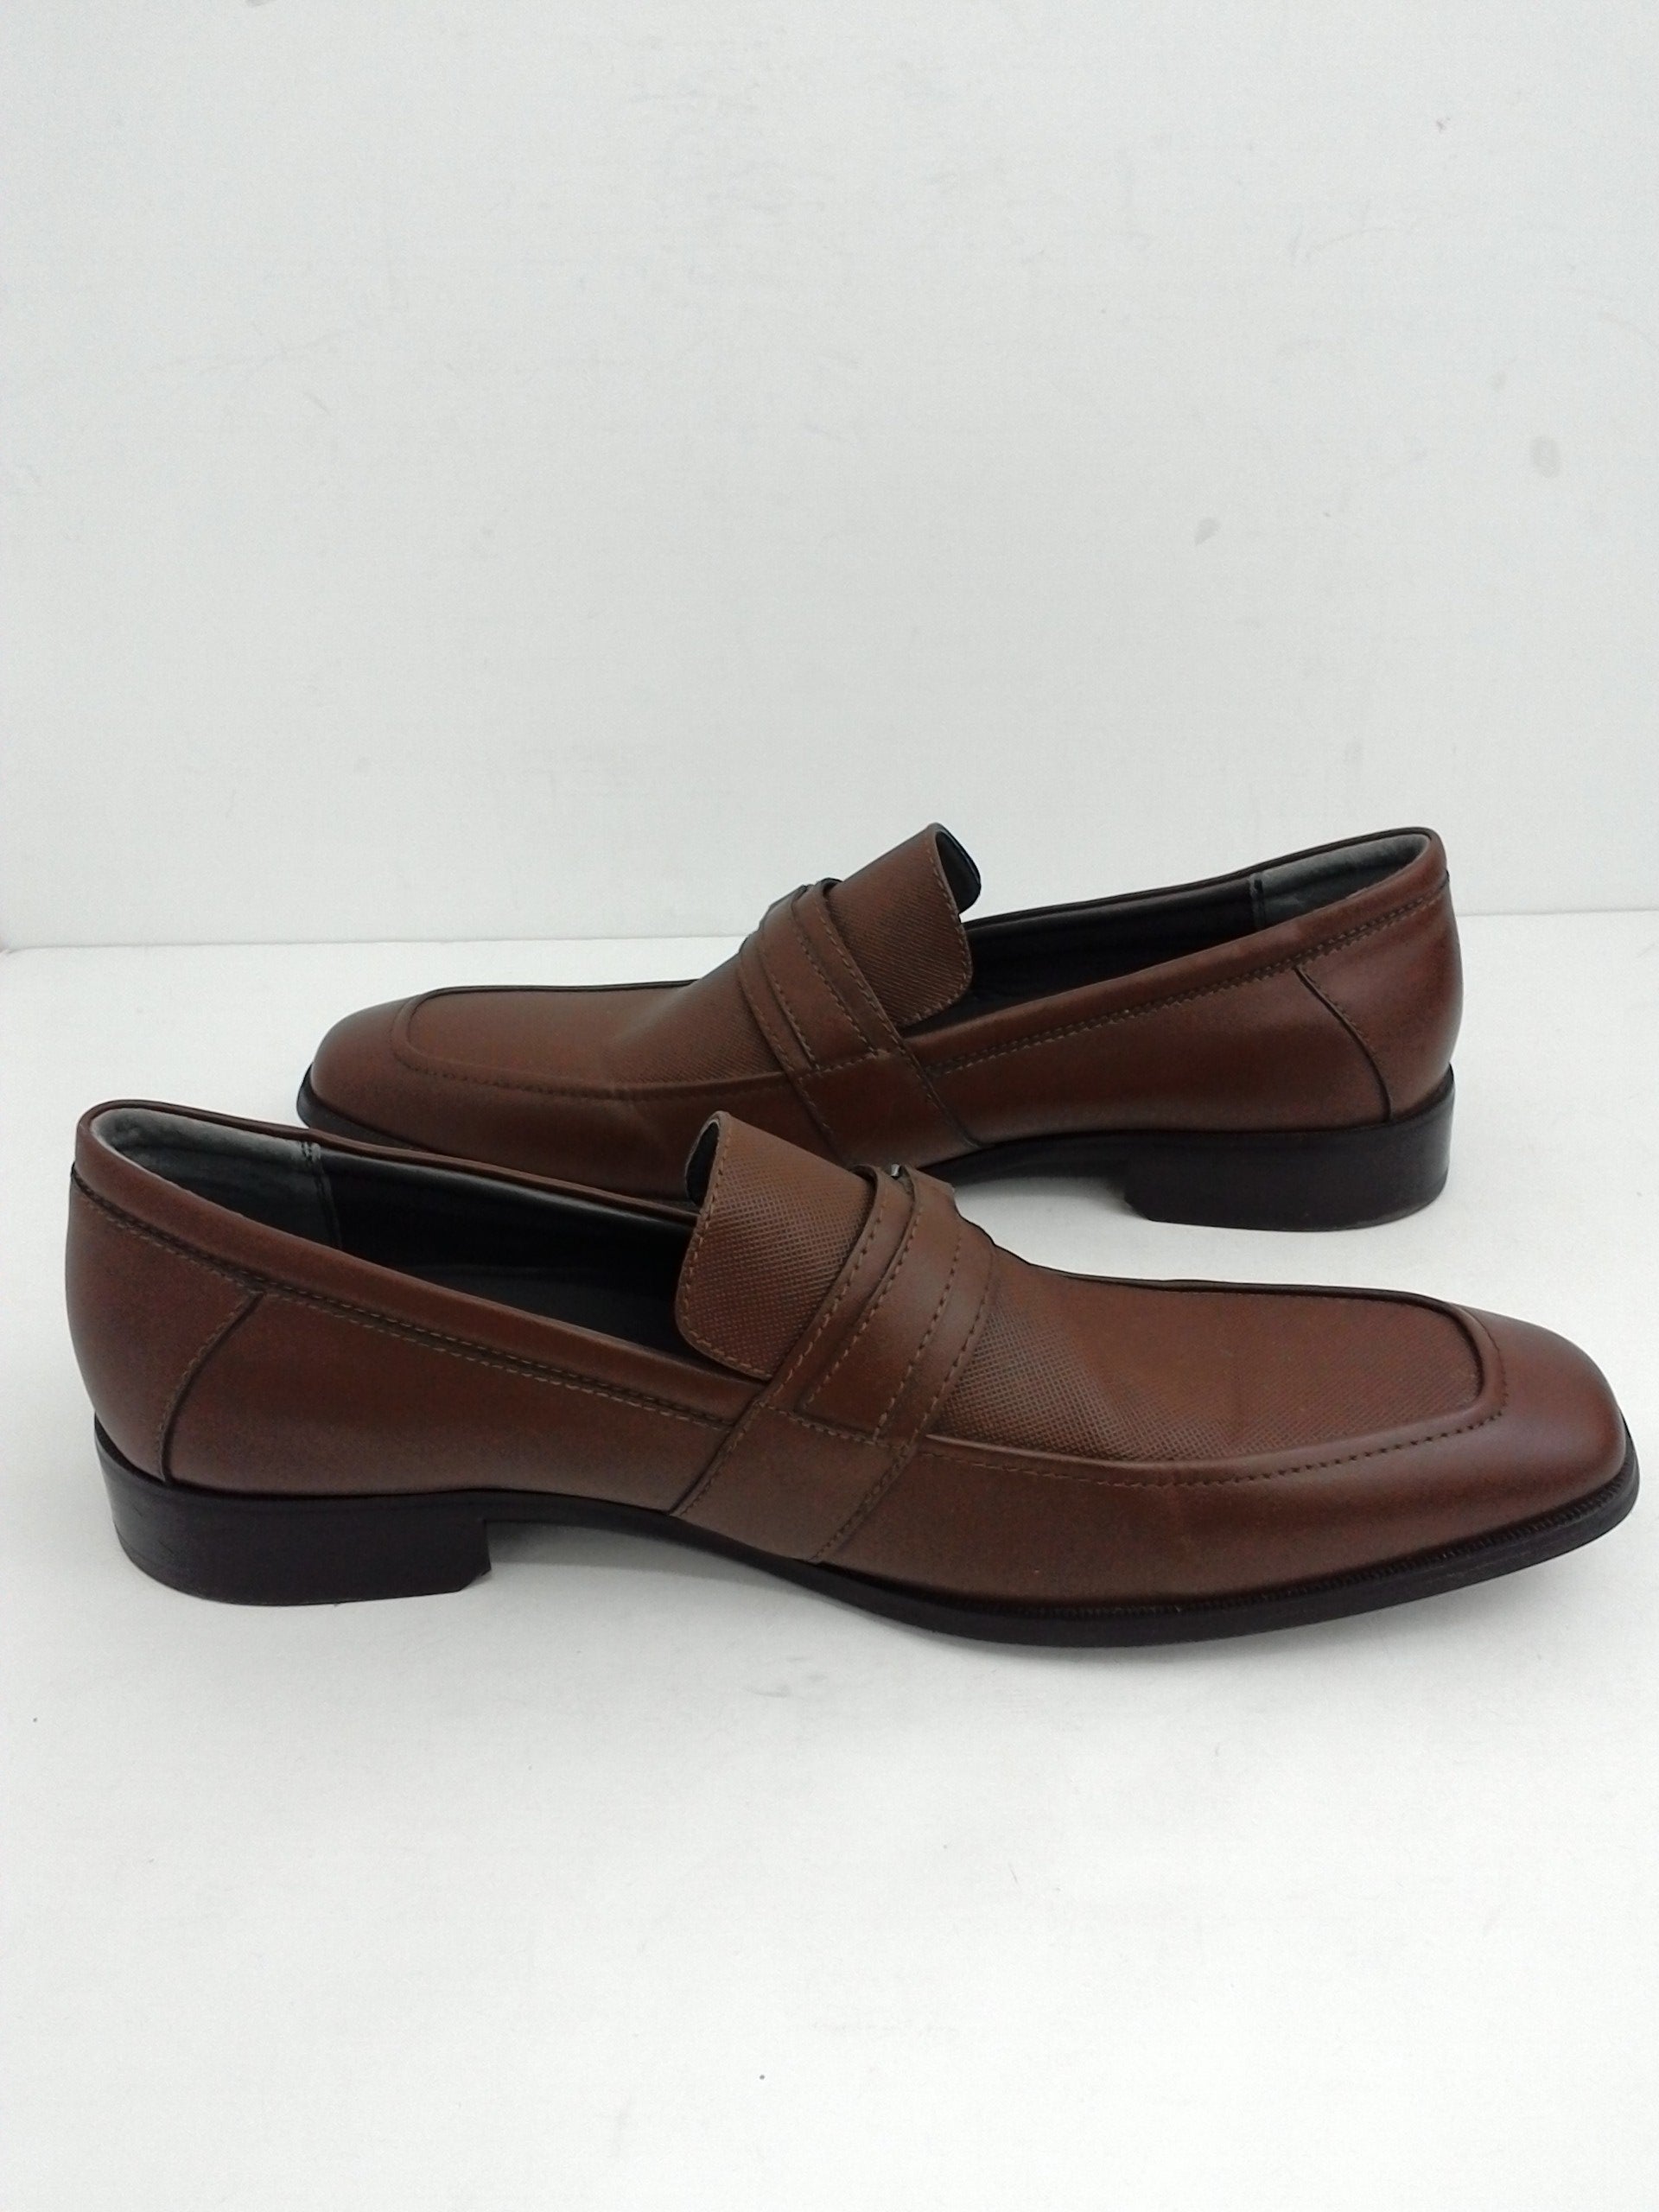 Calvin Klein Men's Jameson Soft Leather Loafers, Brown Size 11.5 M ...